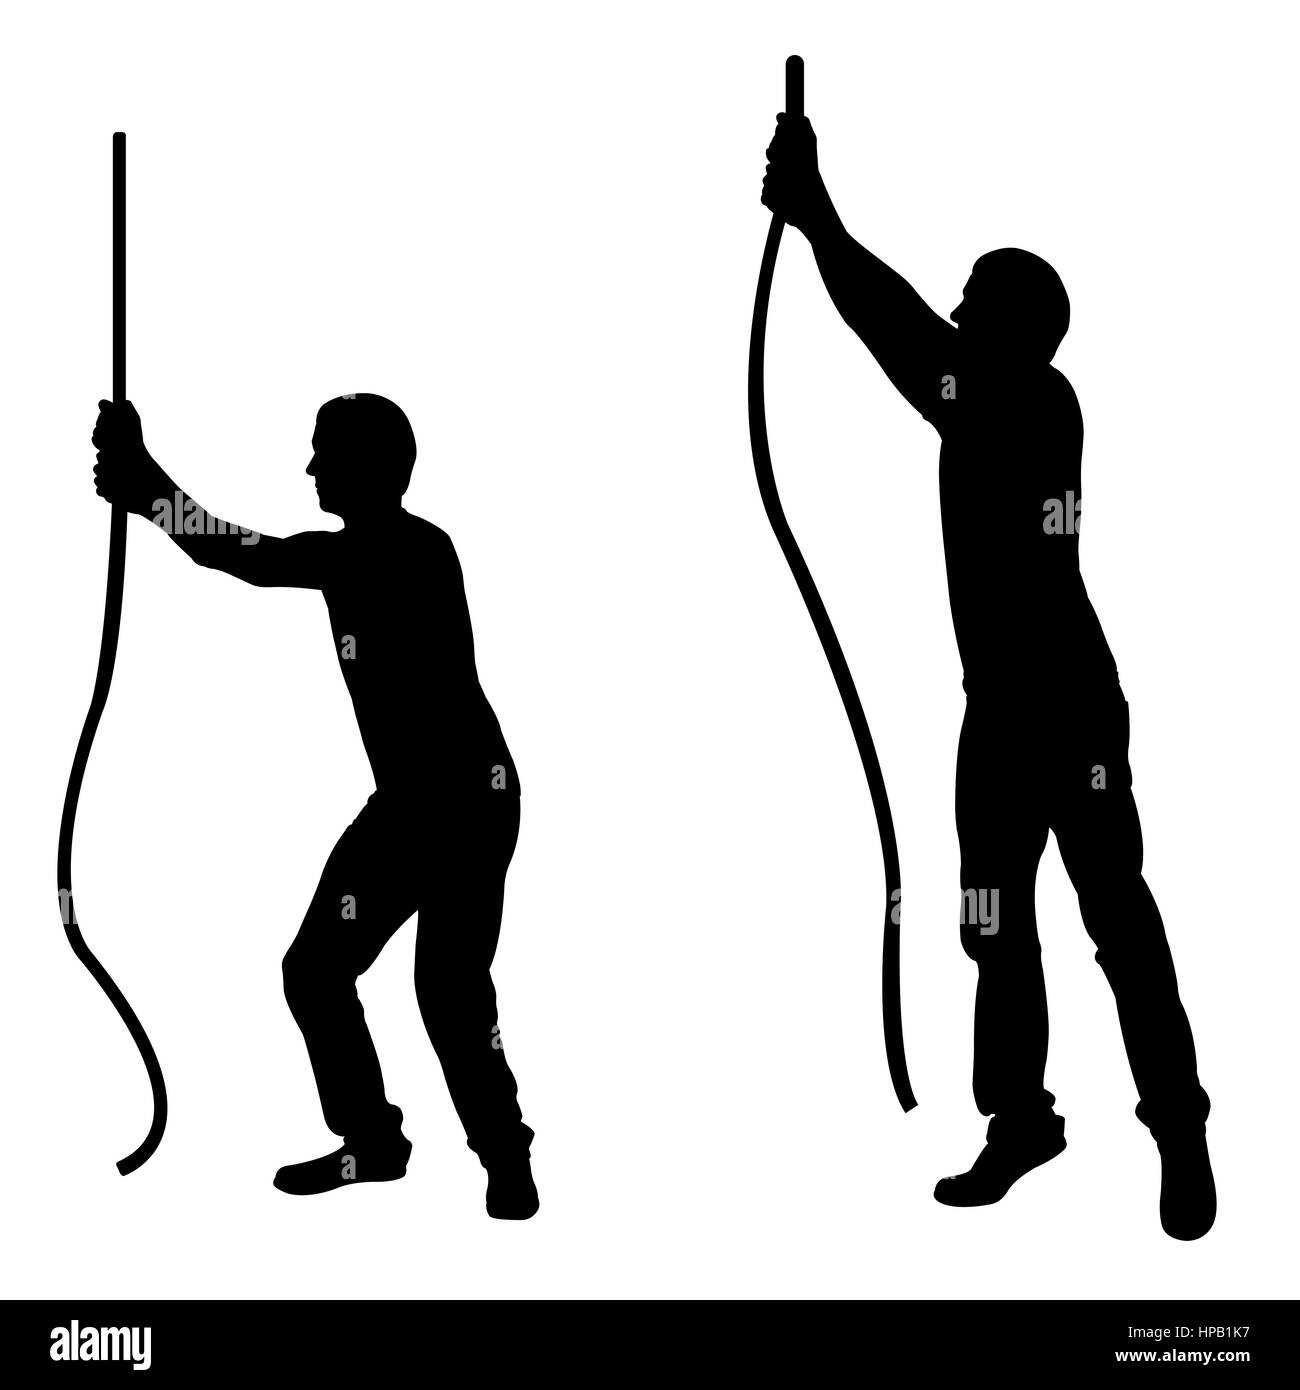 Black silhouettes people pulling rope Cut Out Stock Images